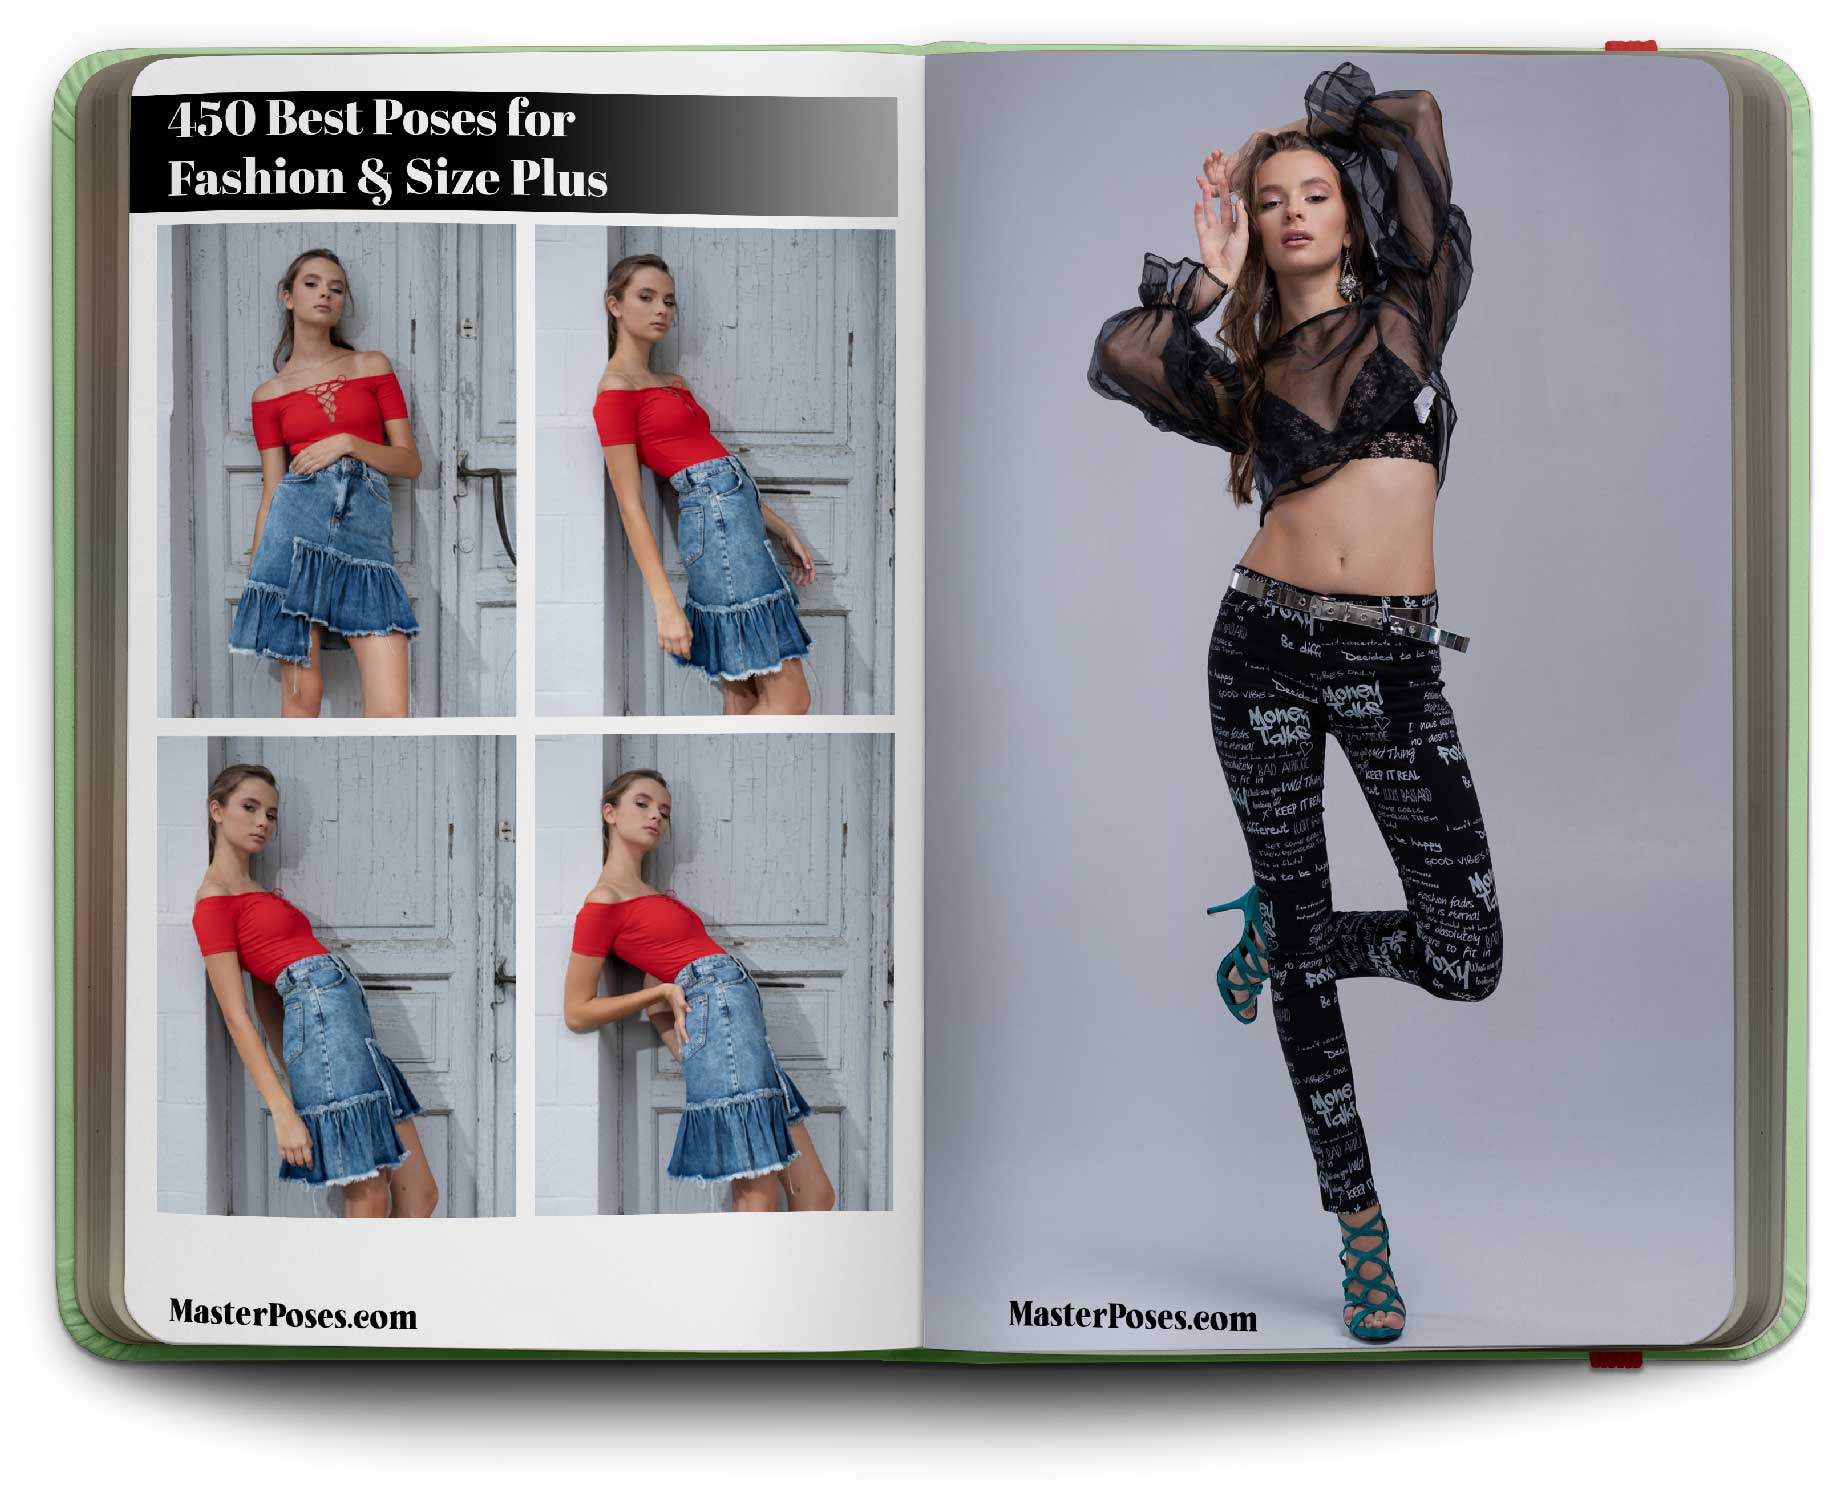 The Fashion Posing Guide just launched! https://www.larajadeeducation.com/ pdf-guides/fashion-posing-guide (link in bio) With over 190+... | Instagram